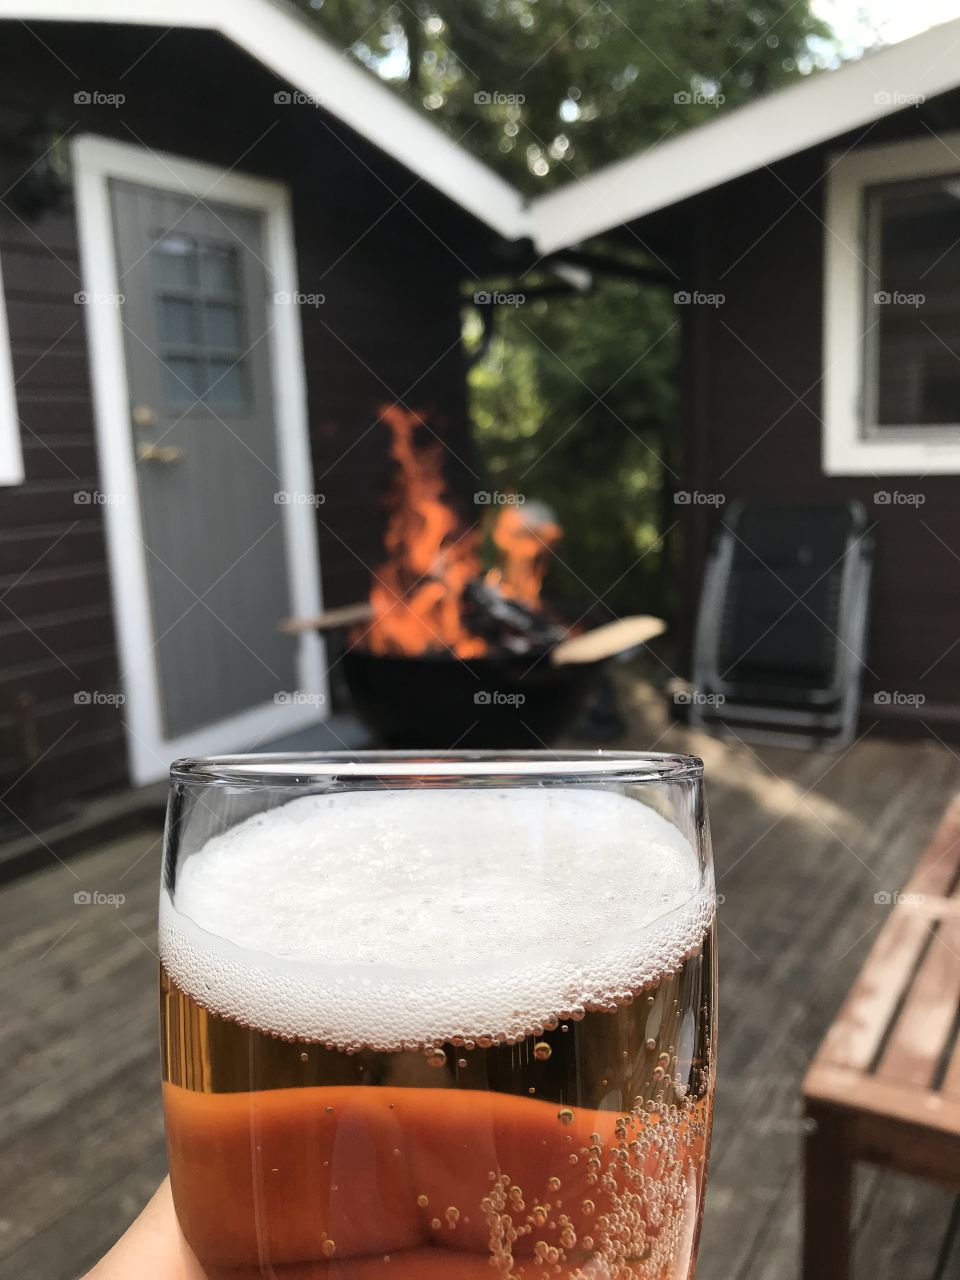 Drinking beer over a fire